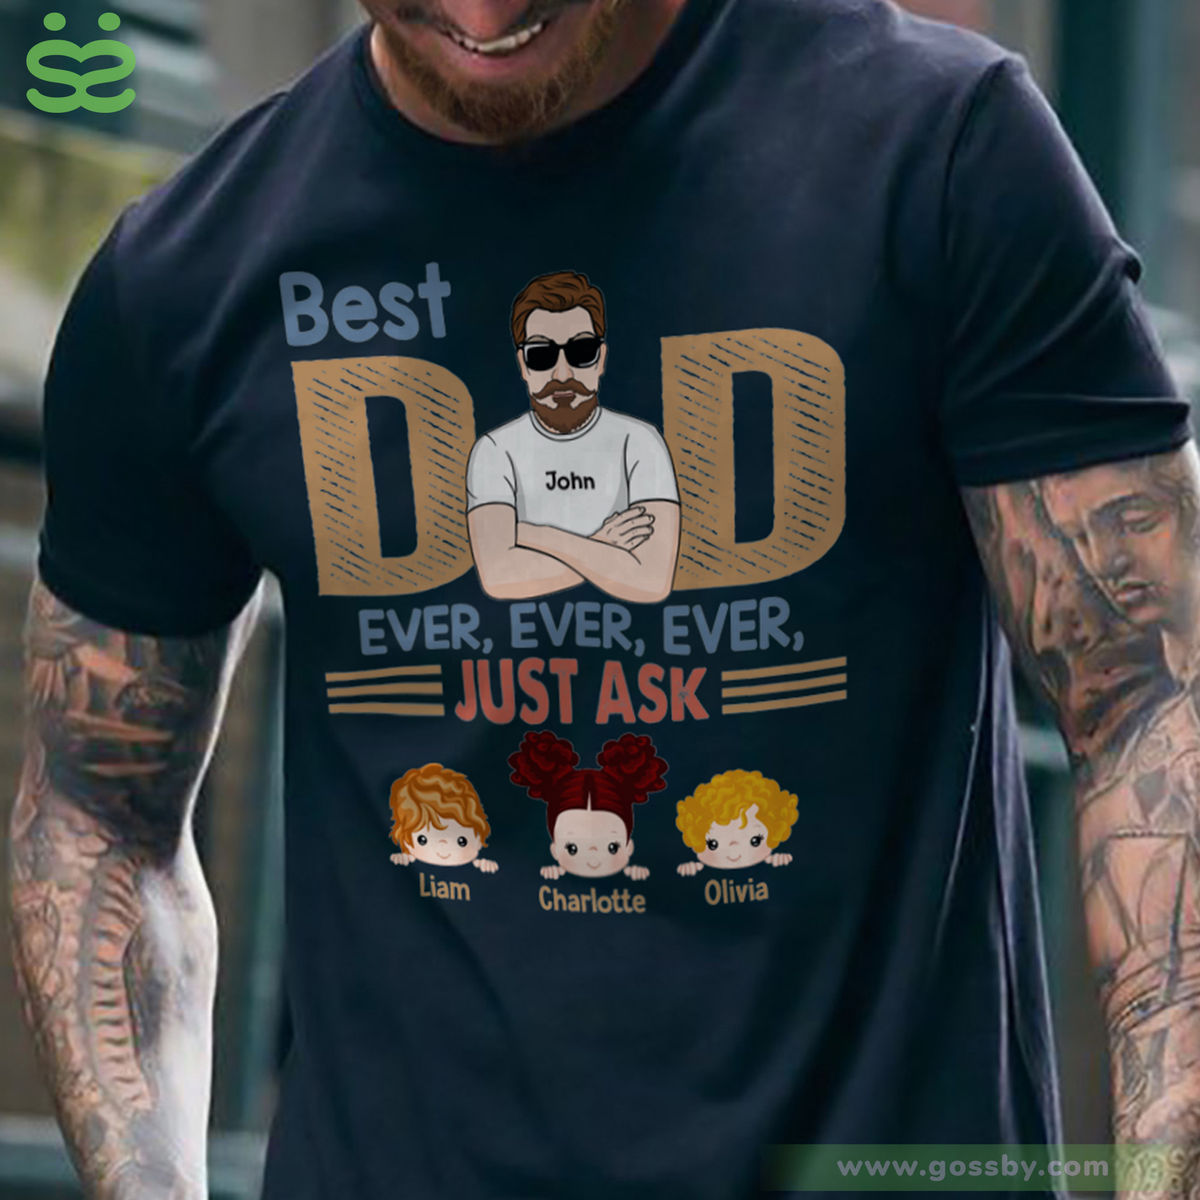 Personalized Shirt - Family - Best Dad Ever Ever Ever Just Ask (STORIES)_1